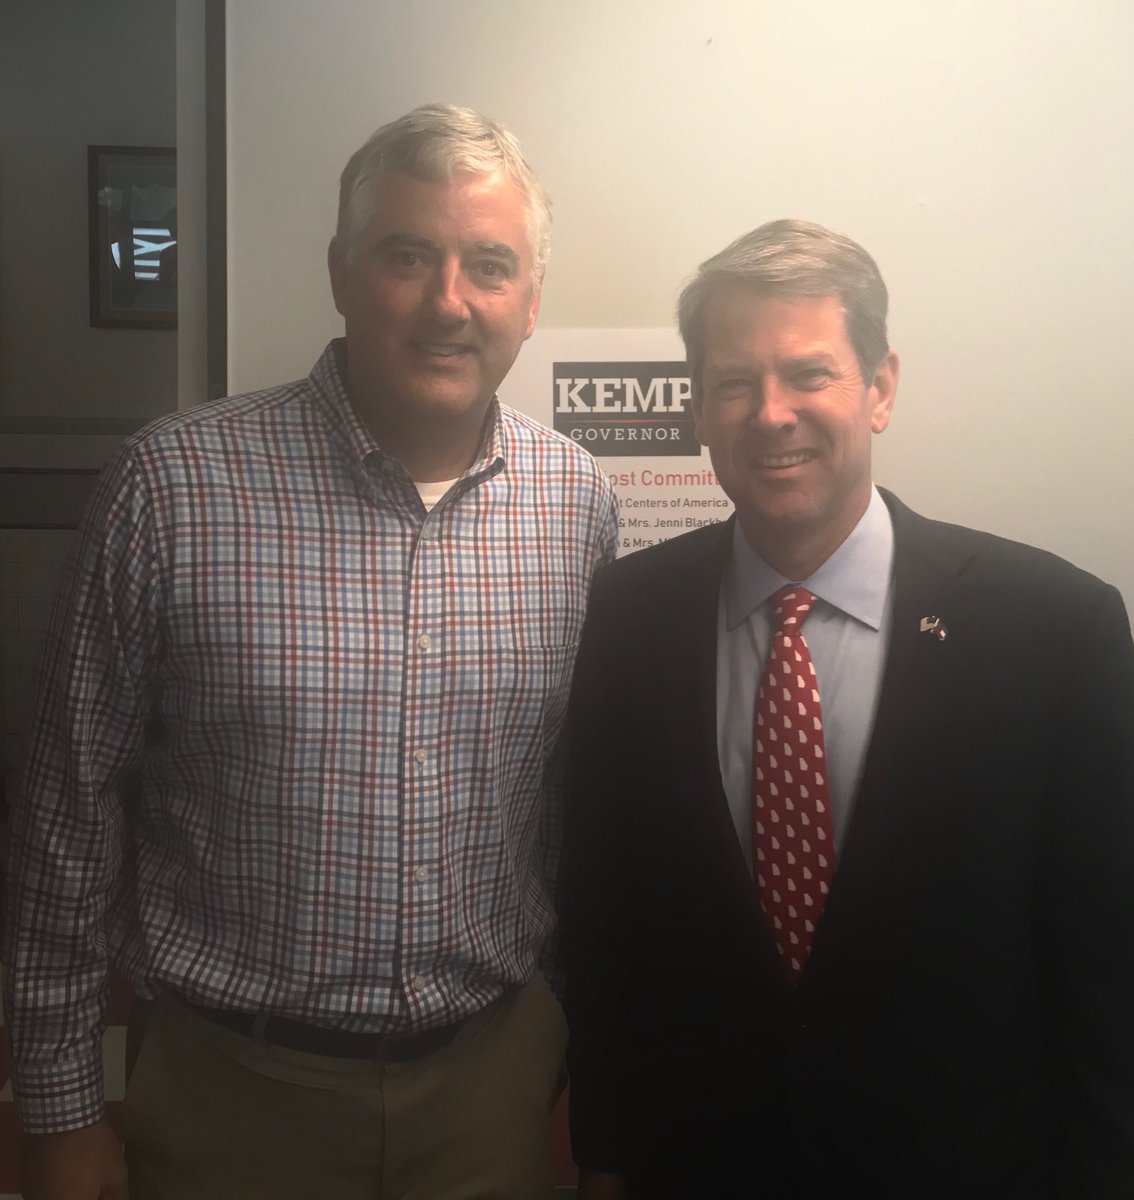 Great to see the next Governor of Georgia ⁦⁦in Newnan today! Proud to join my boss ⁦@DrewFergusonGA⁩ in support of ⁦@BrianKempGA⁩ #TeamKemp #gapol